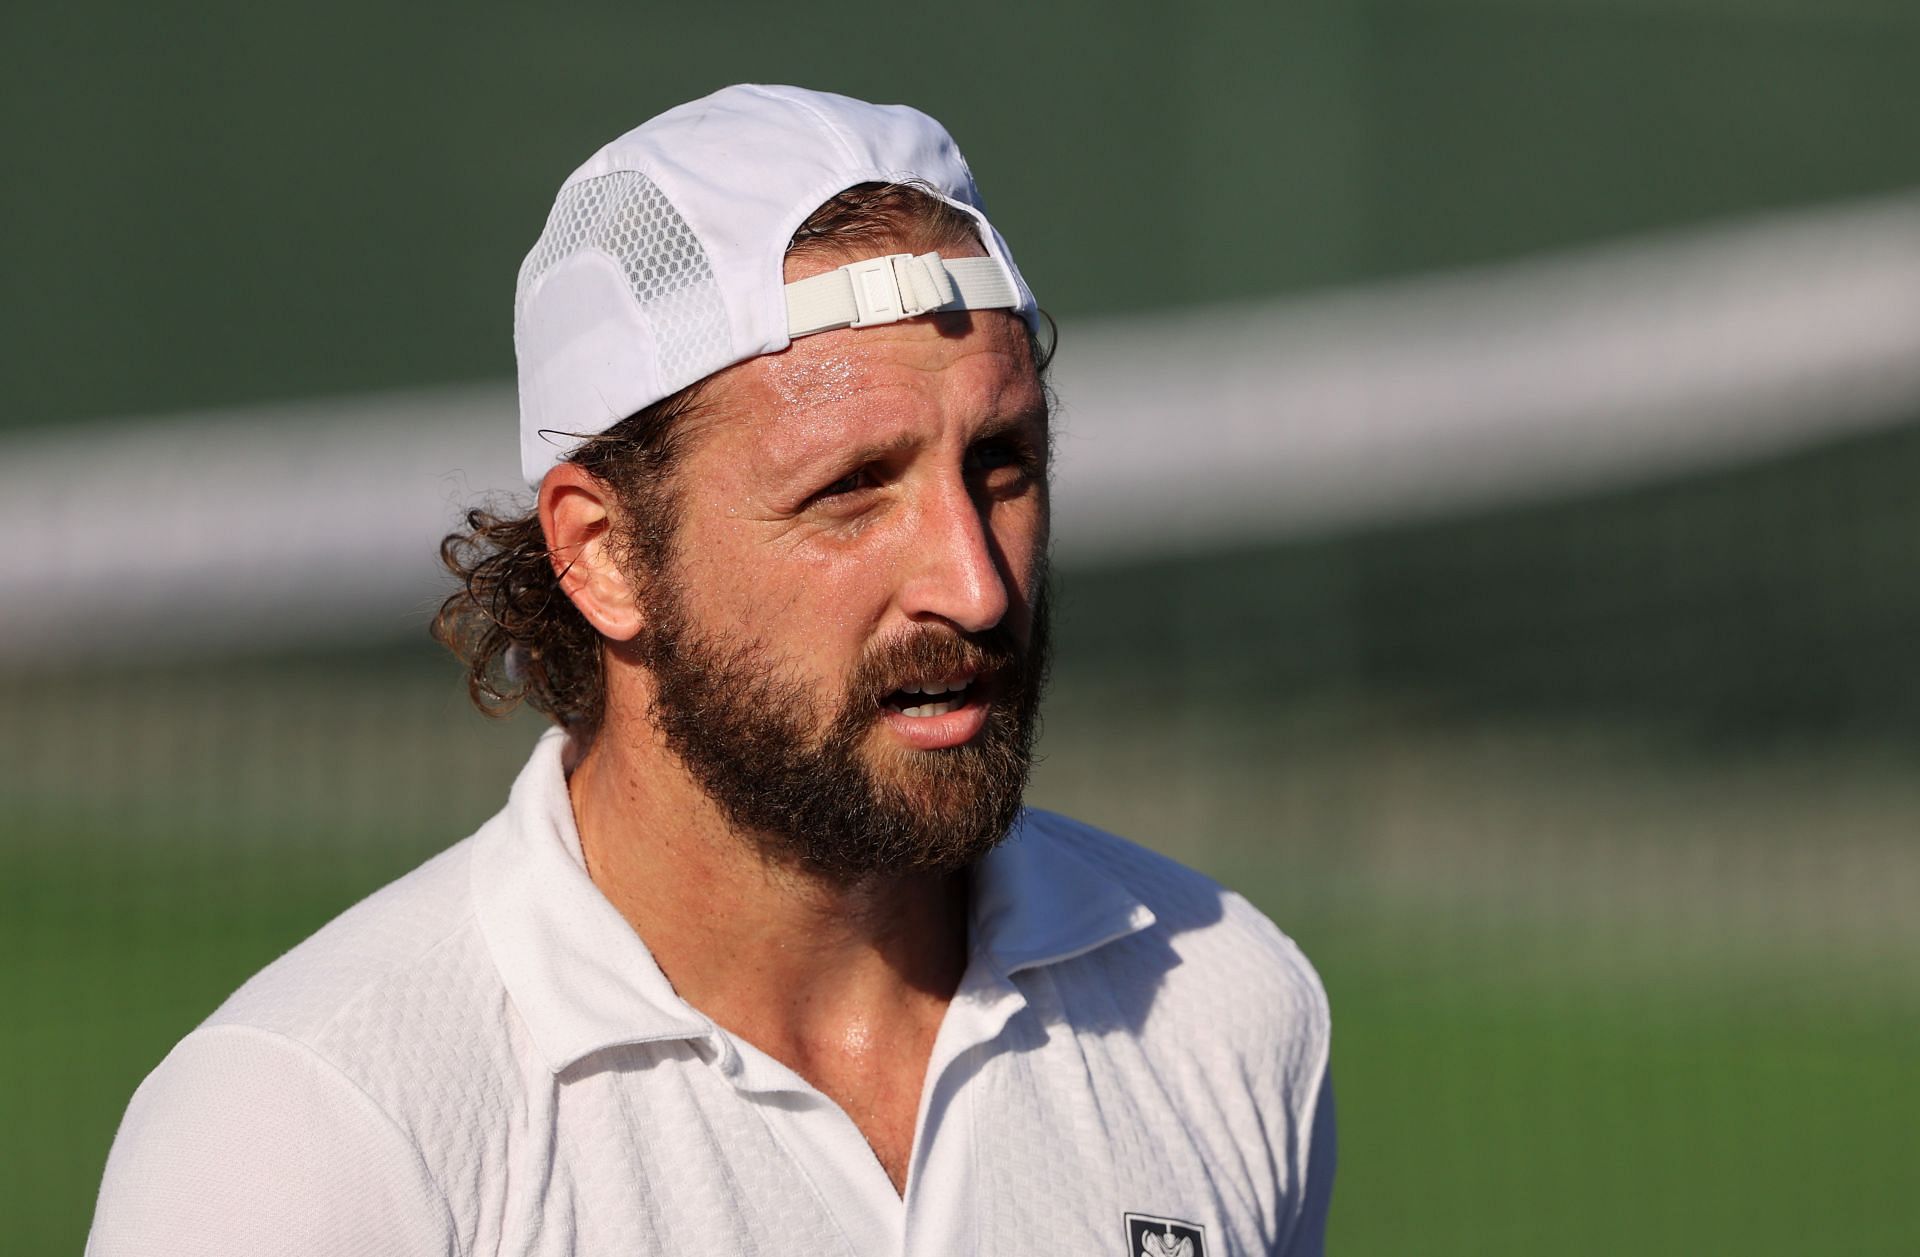 Tennys Sandgren chose not to participate at the Australian Open because of vaccine mandates